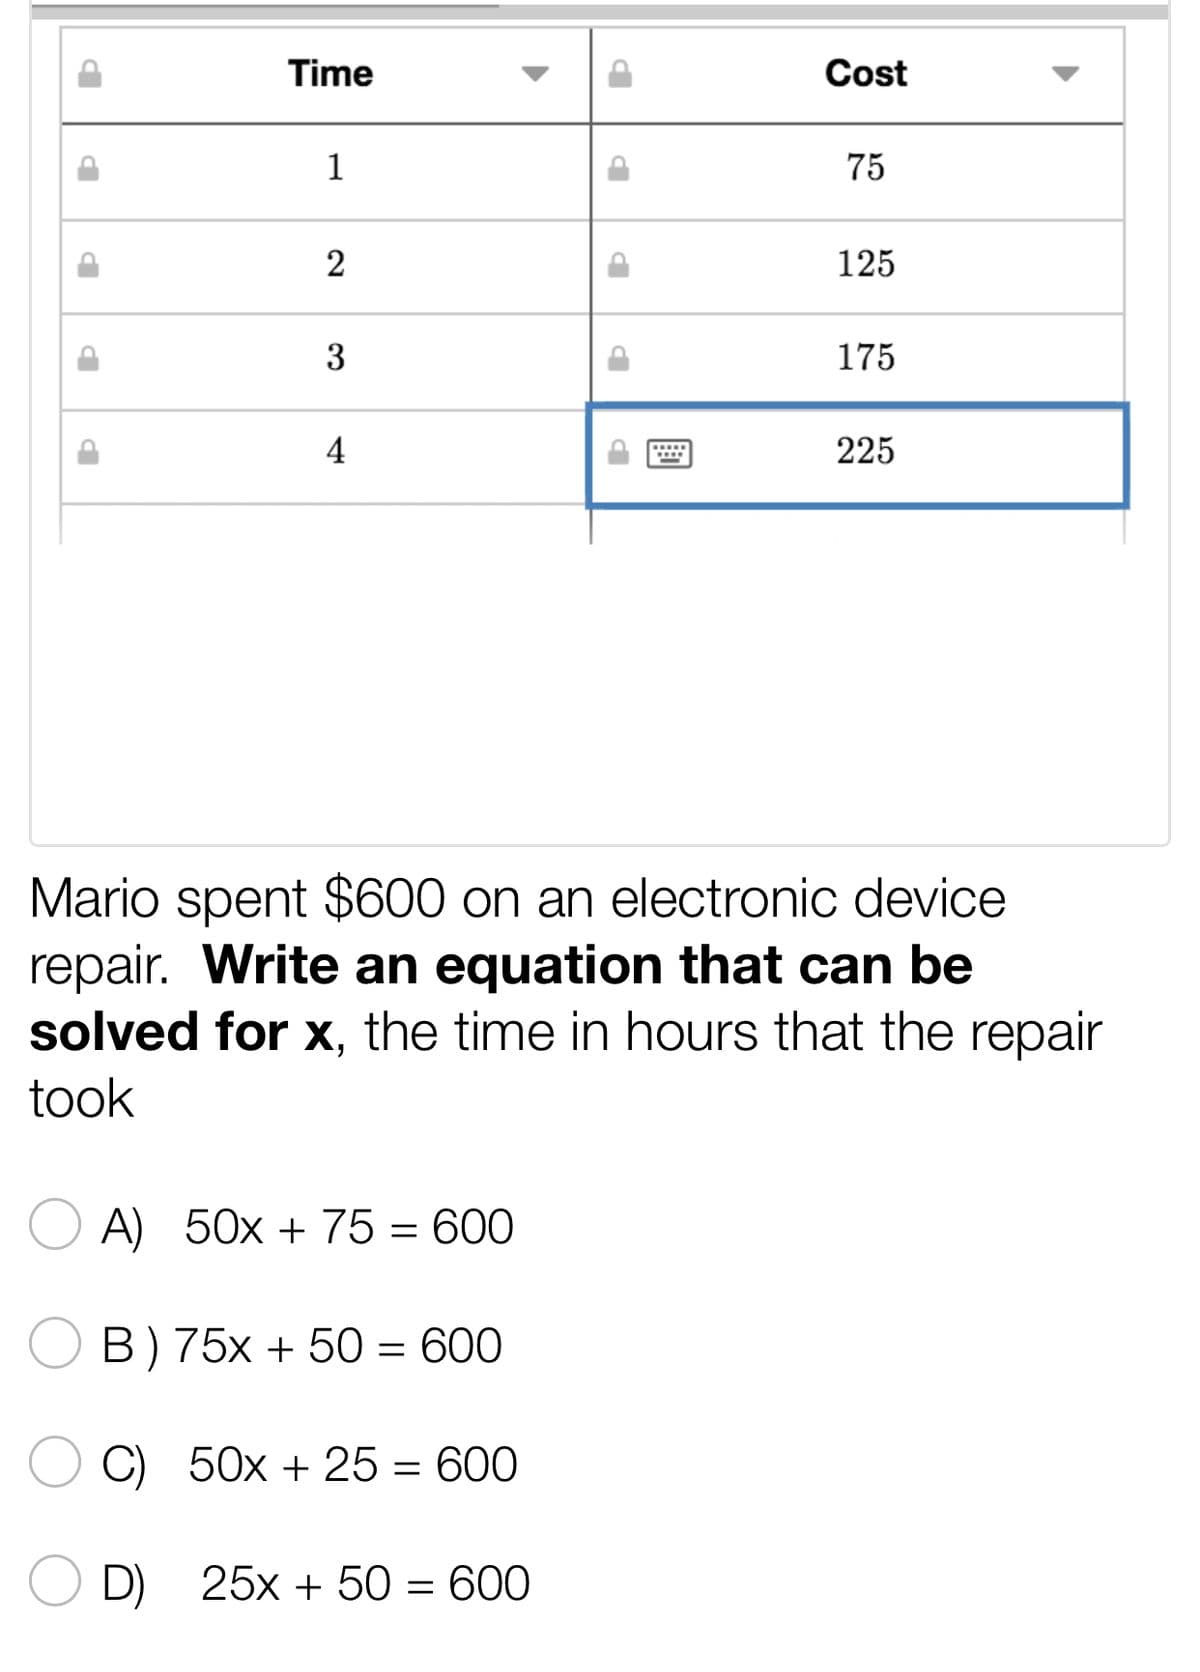 P
Þ
P
b
Time
1
2
3
4
A) 50x + 75 = 600
B) 75x + 50 = 600
C) 50x + 25 = 600
Cost
D) 25x + 50 = 600
75
125
Mario spent $600 on an electronic device
repair. Write an equation that can be
solved for x, the time in hours that the repair
took
175
225